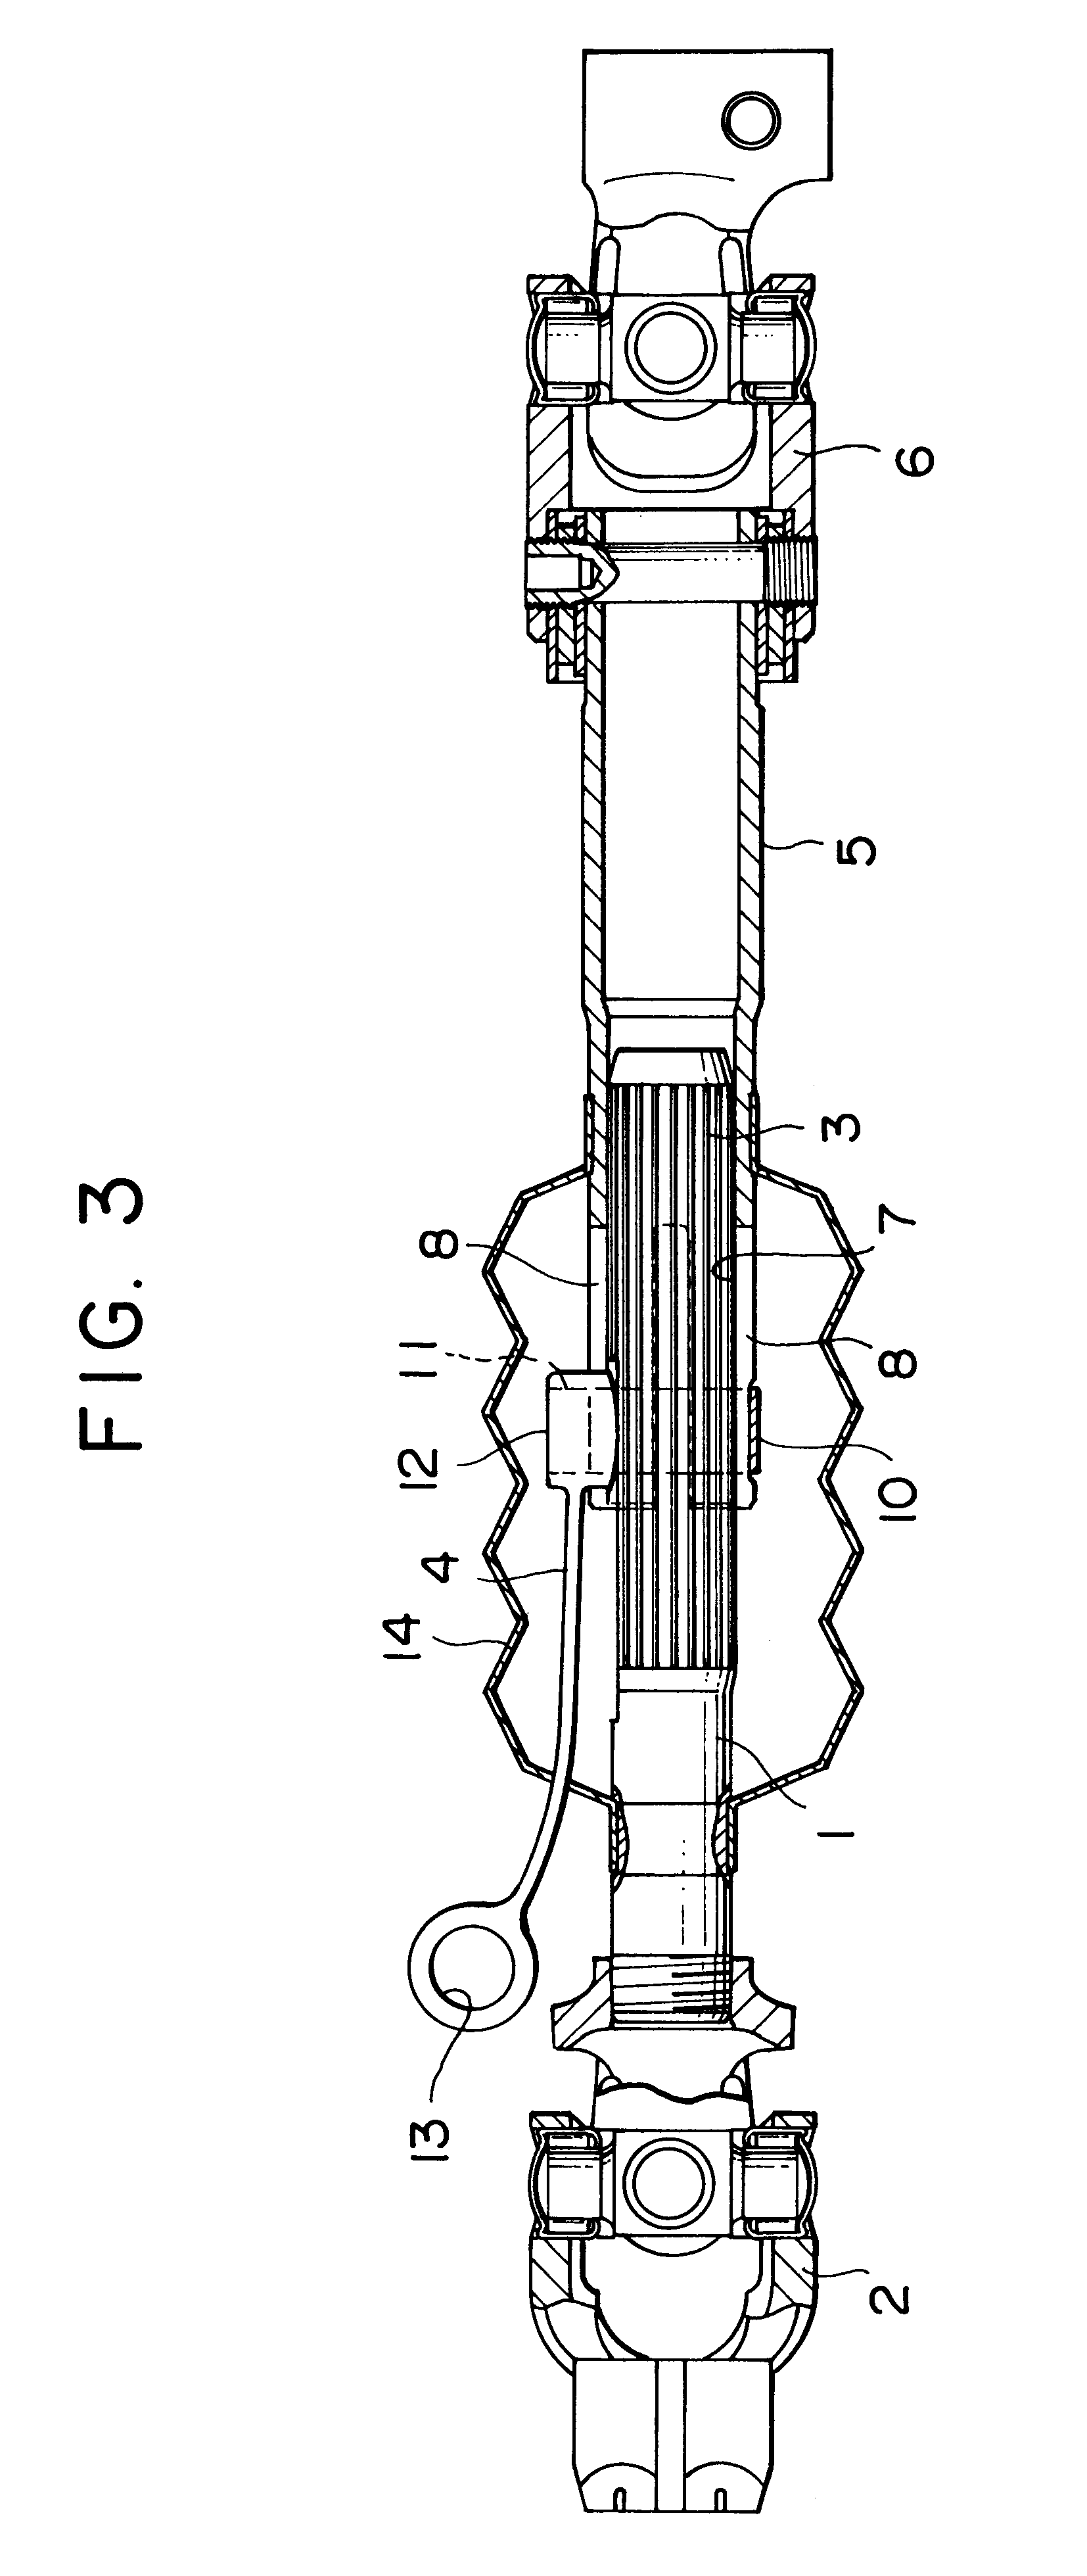 Coupling structure of variable length shaft